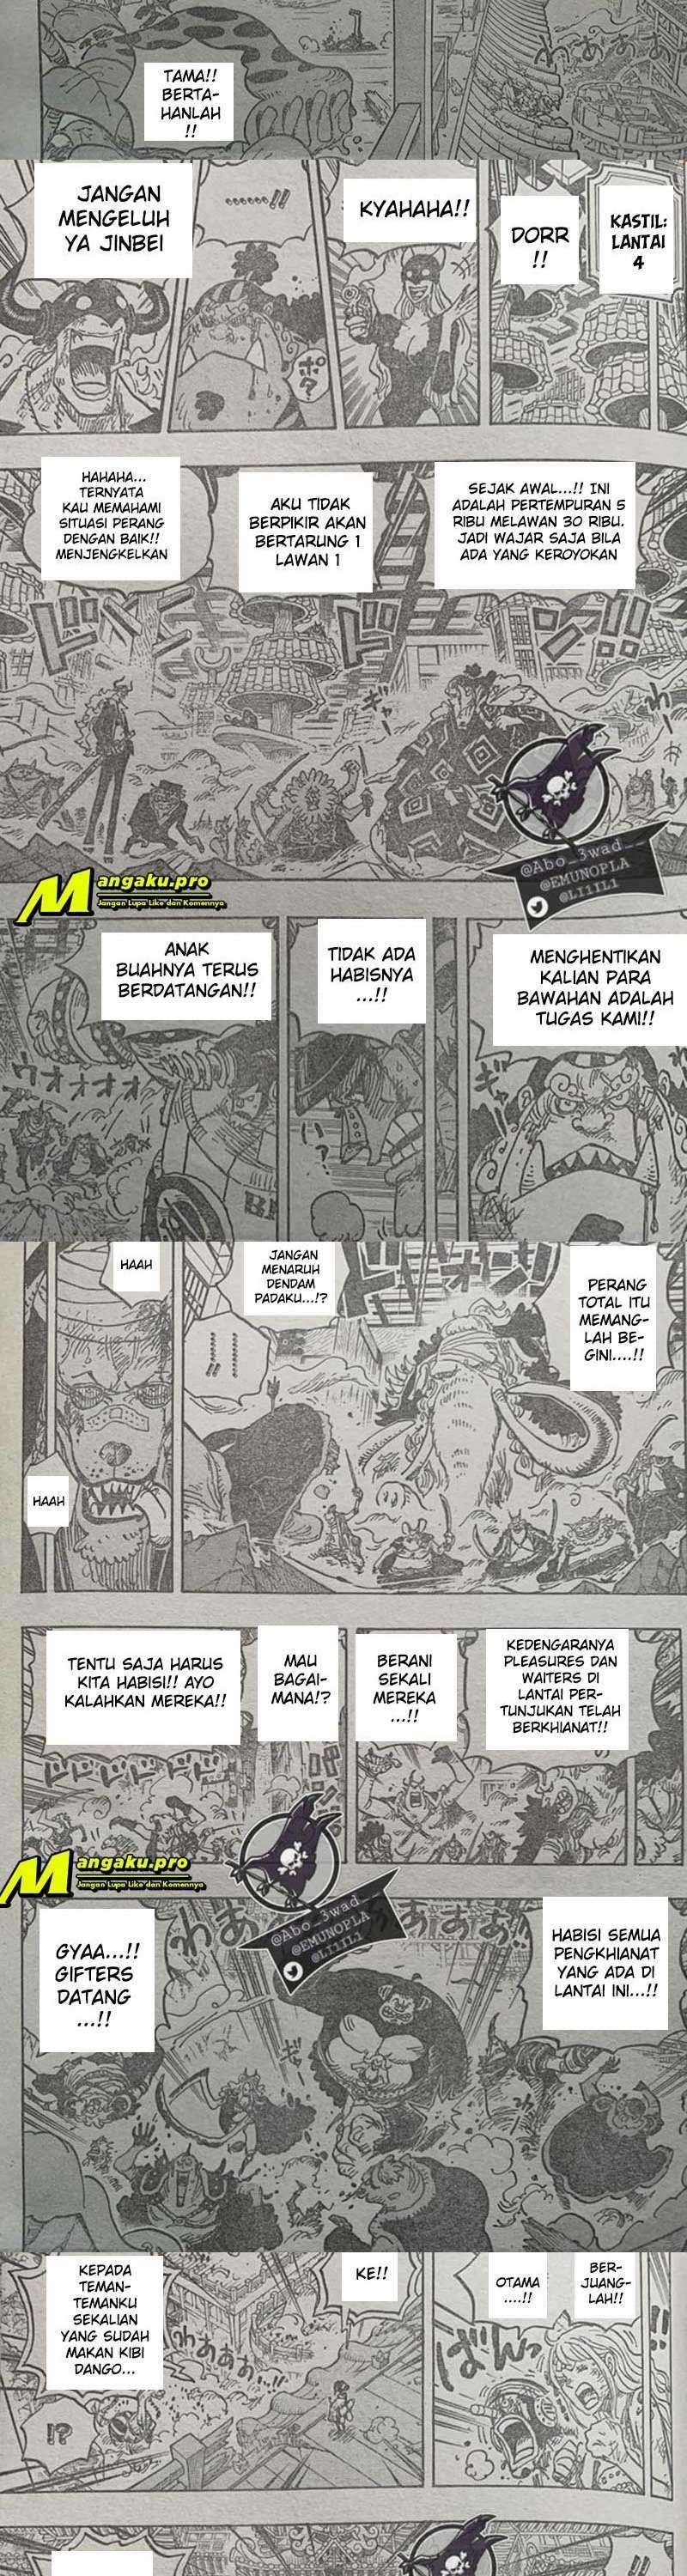 One Piece Chapter 1017 Lq - 51